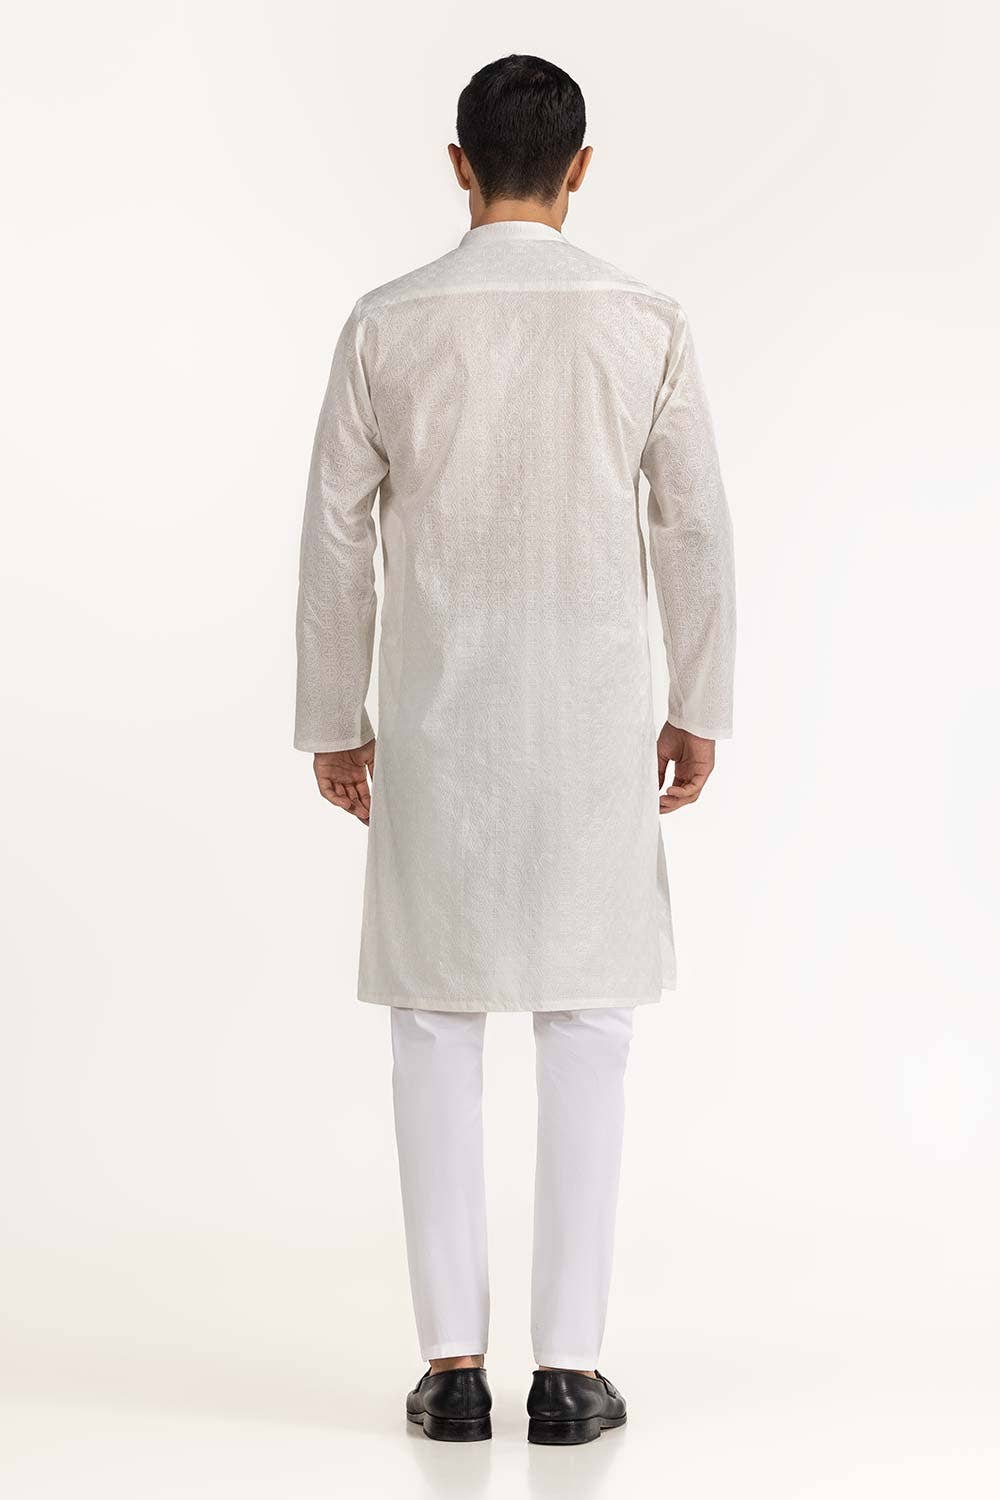 Gul Ahmed Ready to Wear Men's White Embroidered Kurta KR-EMB23-019